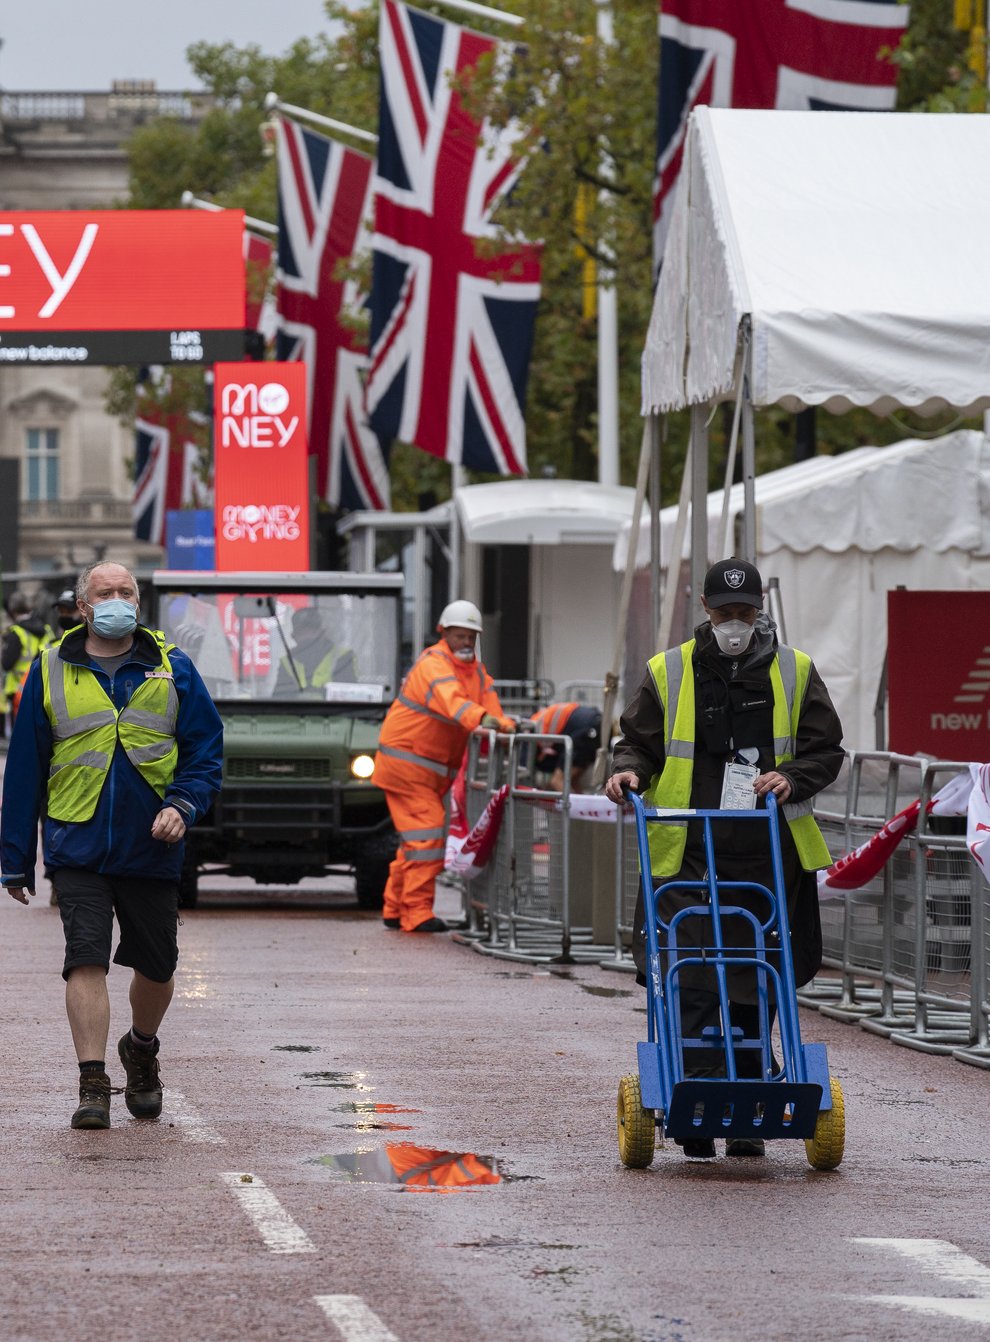 Elite athletes will run the Virgin Money London Marathon on a closed-loop circuit around St James’s Park in central London on October 4